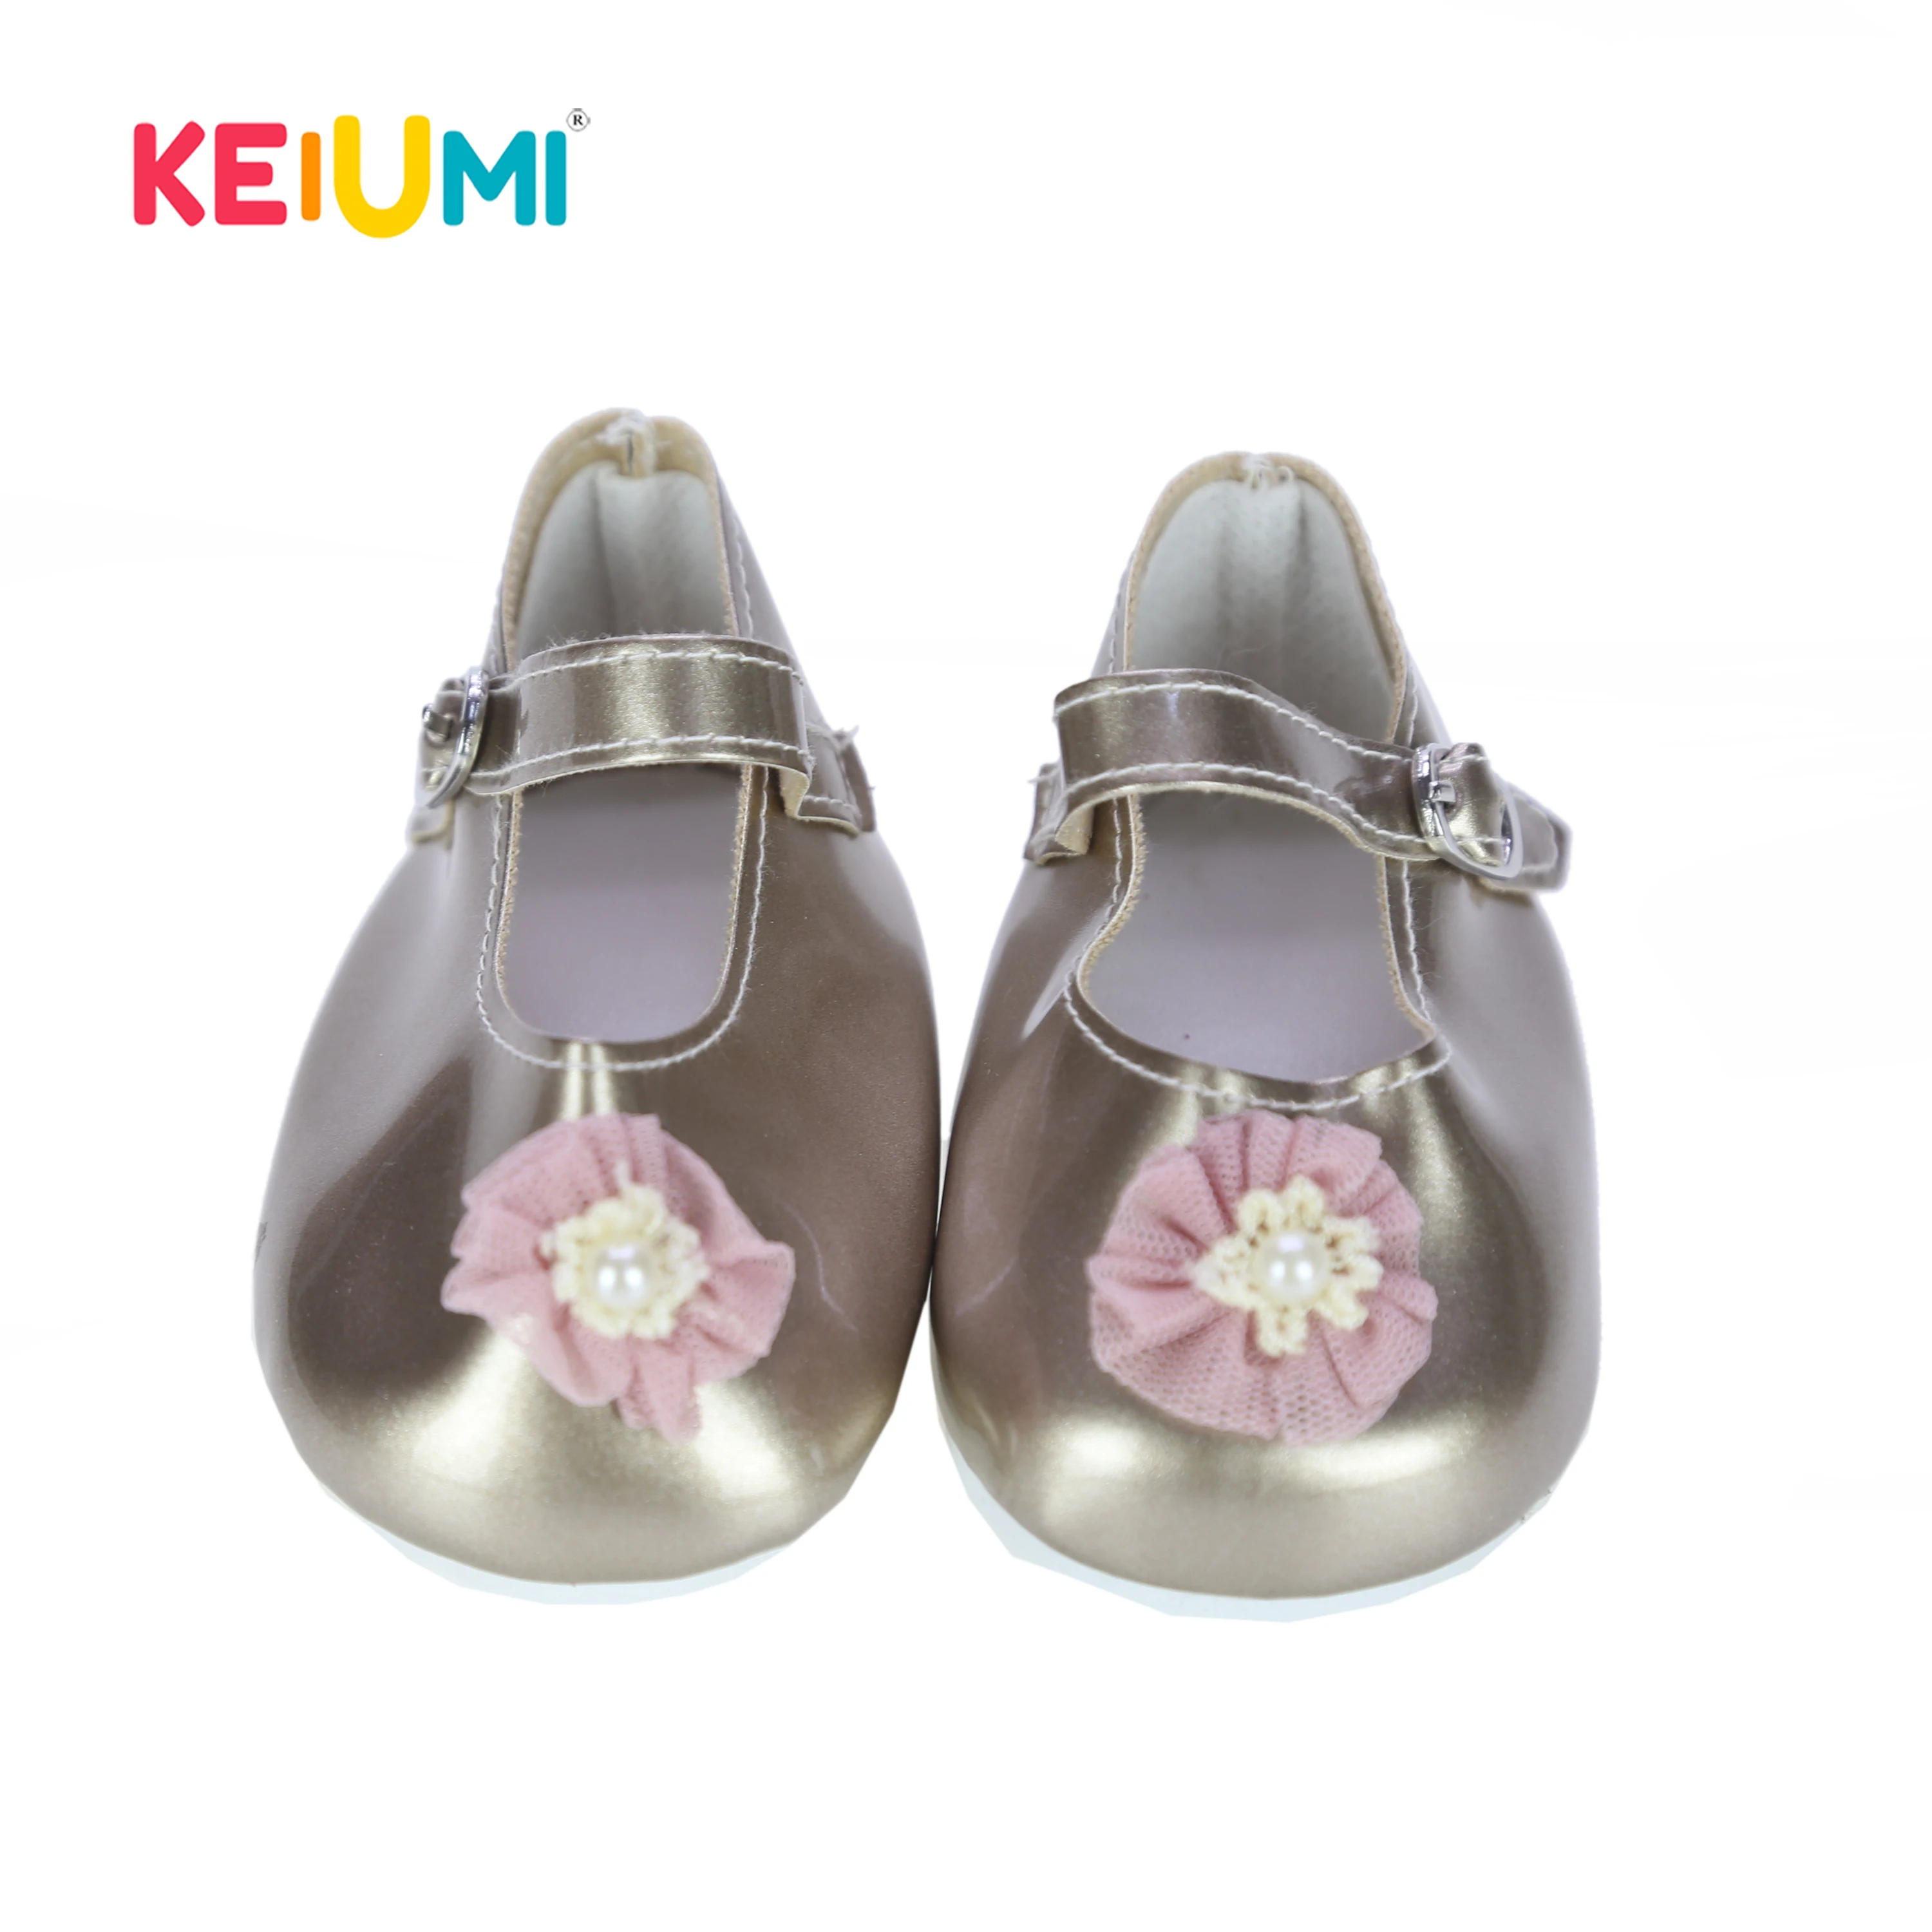 

Fashion KEIUMI 22-24 Inch Doll Shoes-My Little Baby Accessories Suit For Reborn Baby Doll Toy Sandal For Girls Collection